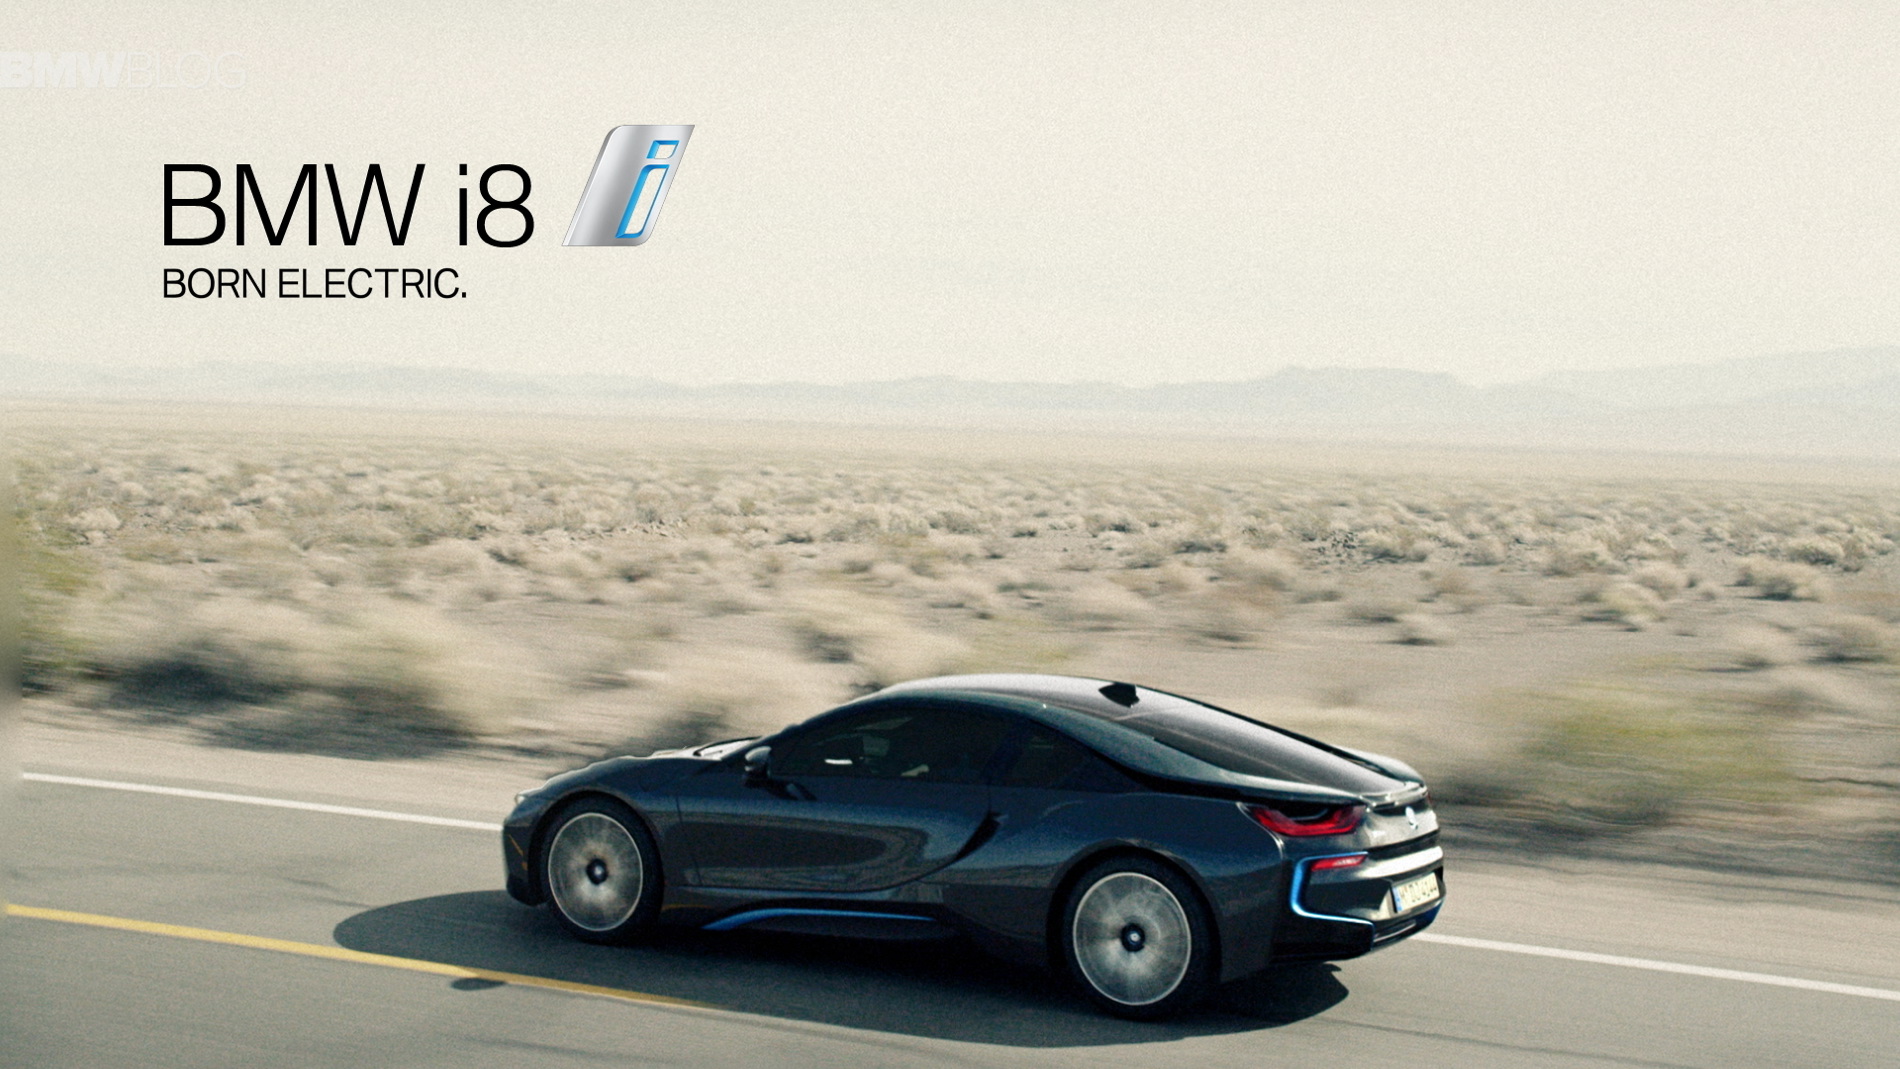 Global launch campaign for BMW i8 10